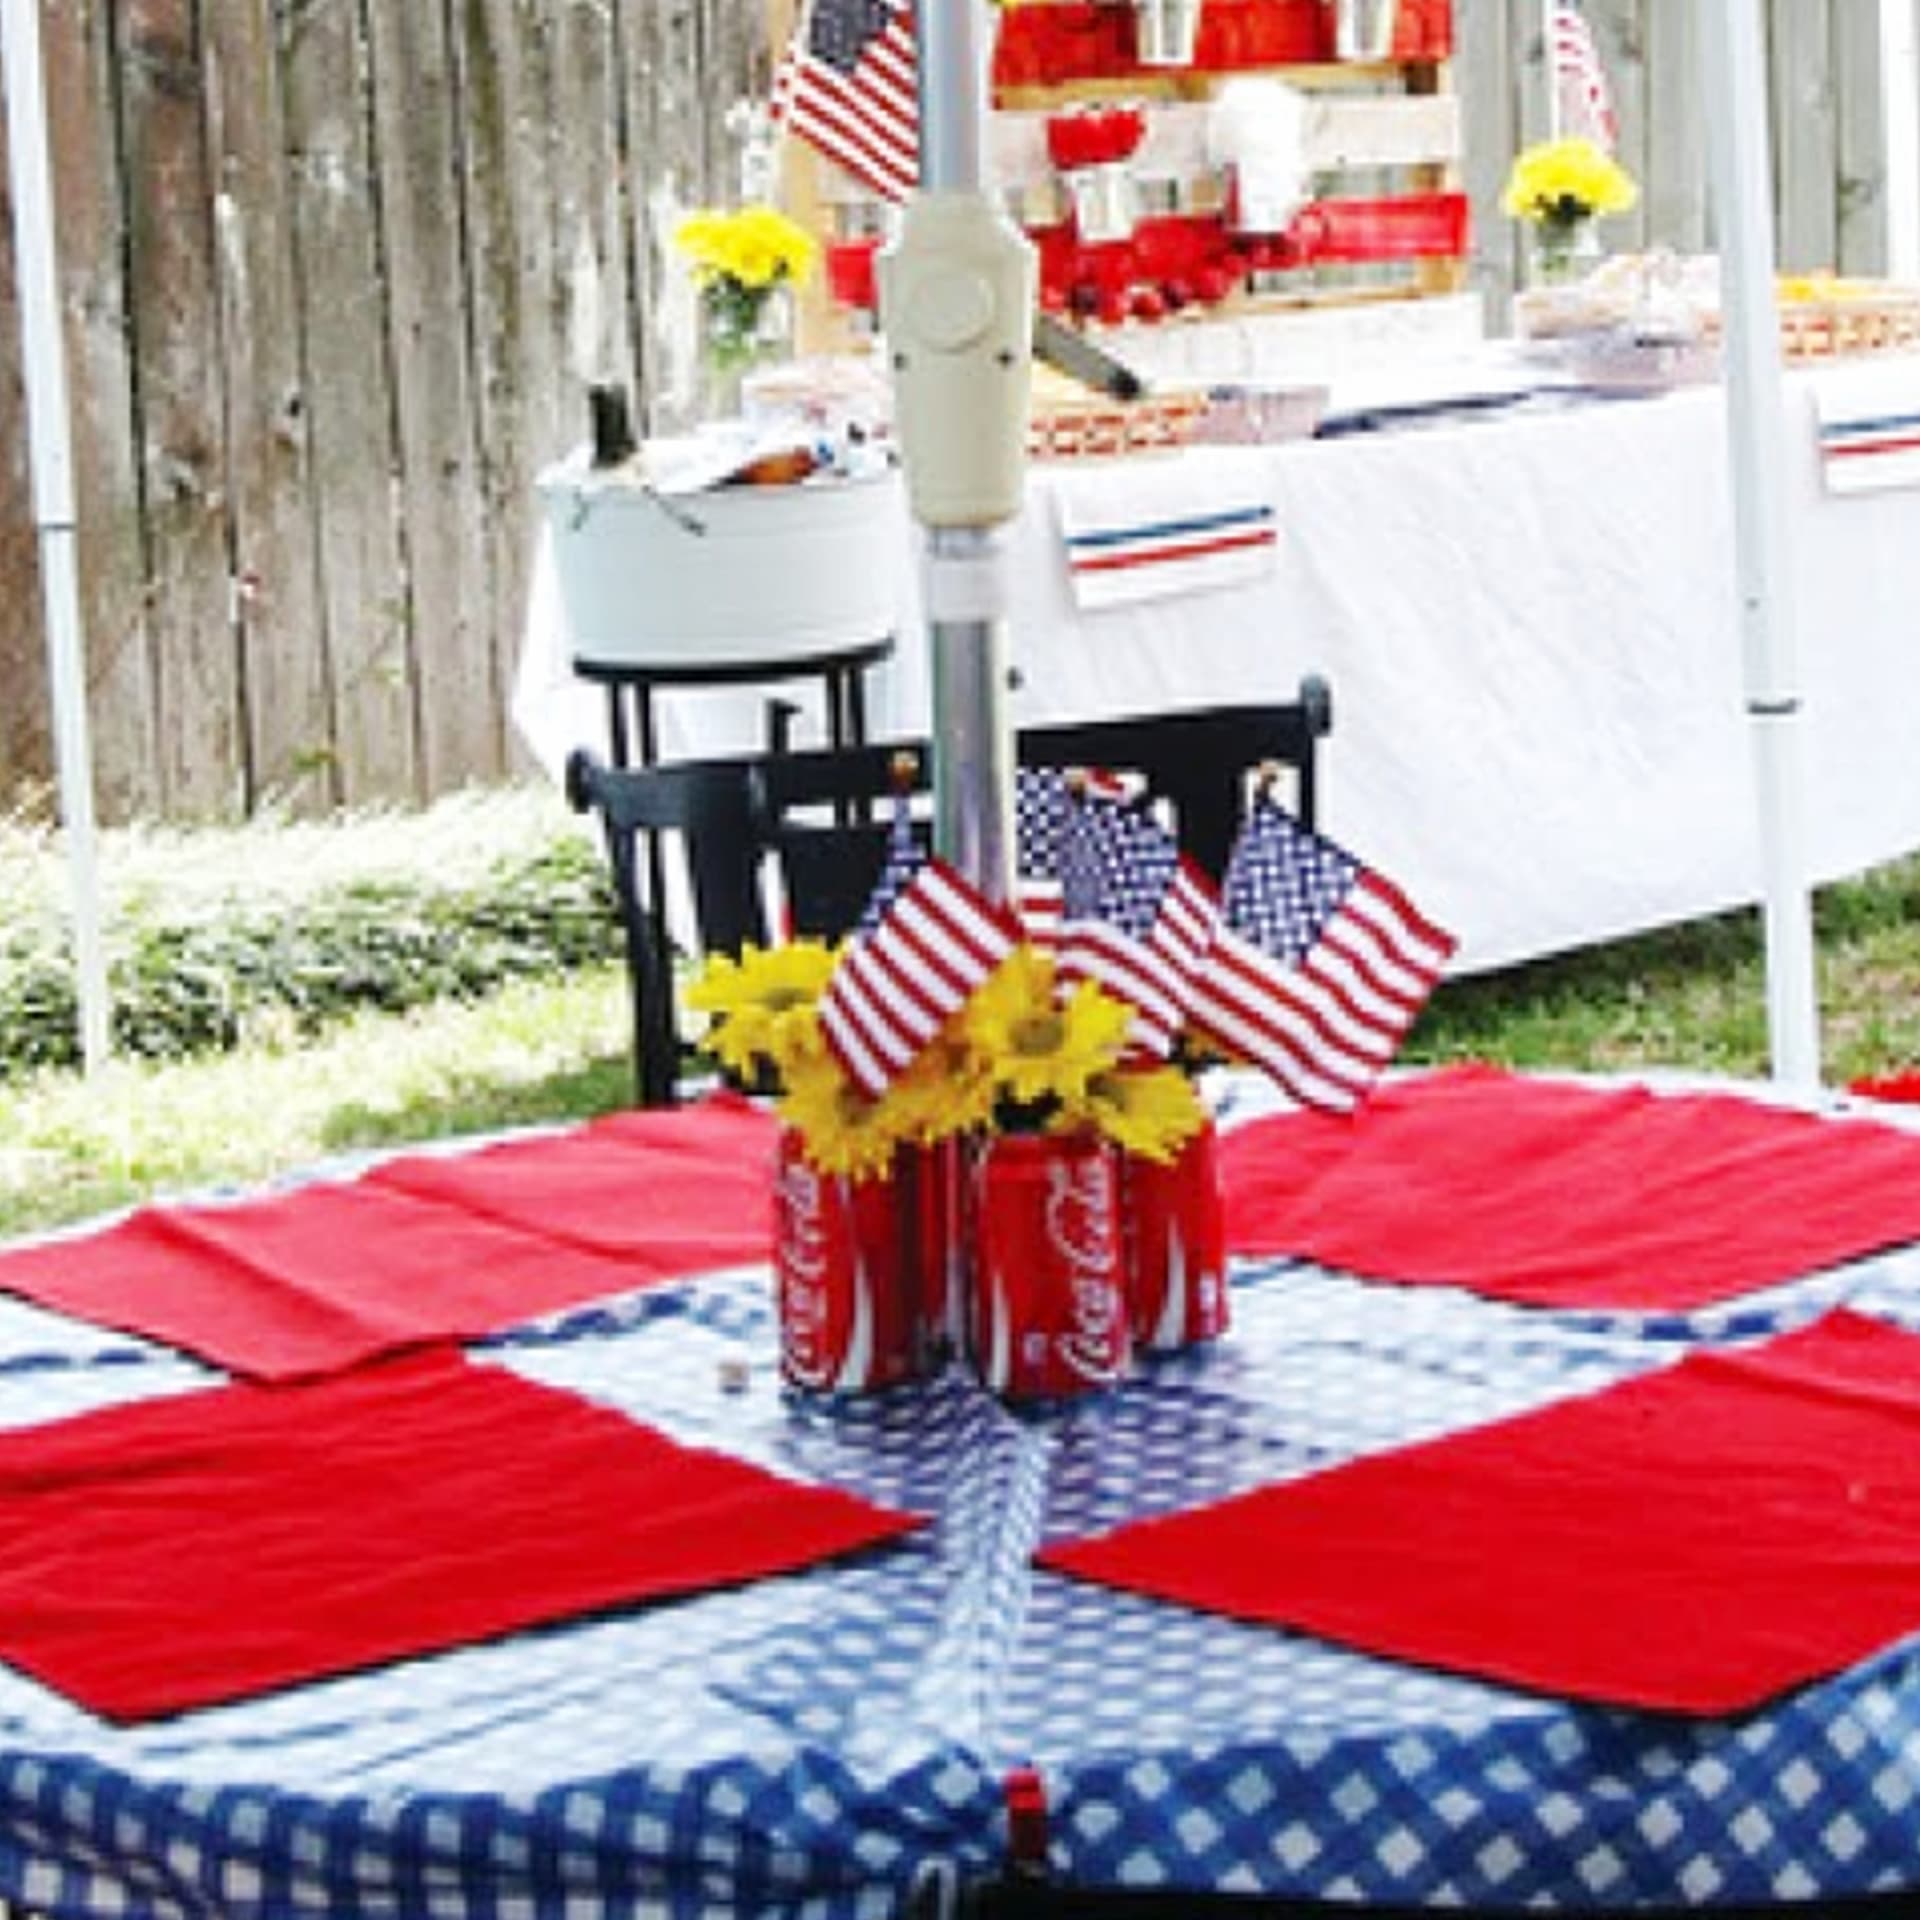 4th of July party ideas - table decorating ideas for a 4th of July potluck picnic, cookout or block party